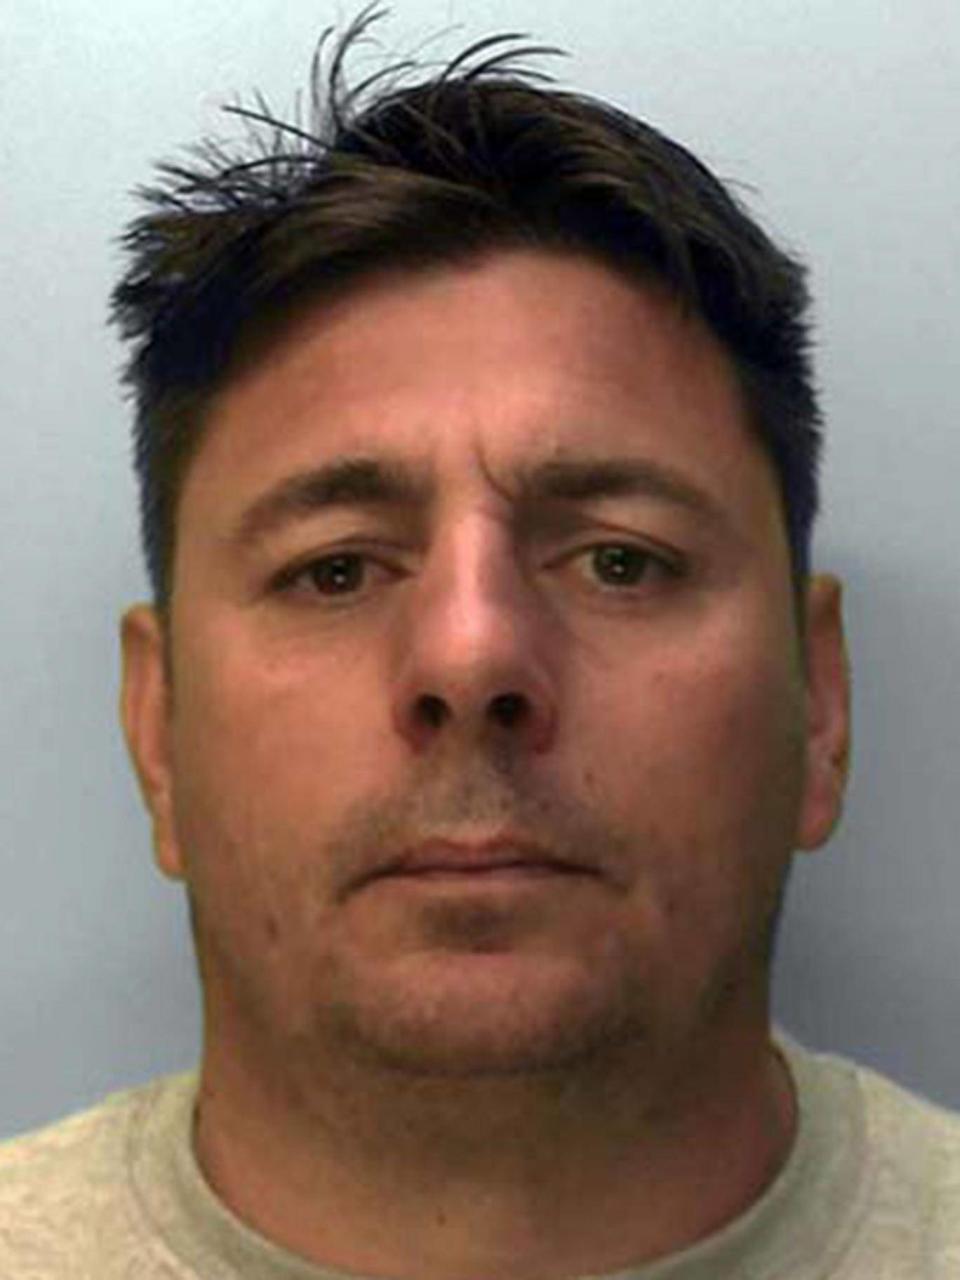 Duncan Hearsey, 41, has been sentenced to a minimum of 21 years in prison for murdering Alan Creasey (Sussex Police)